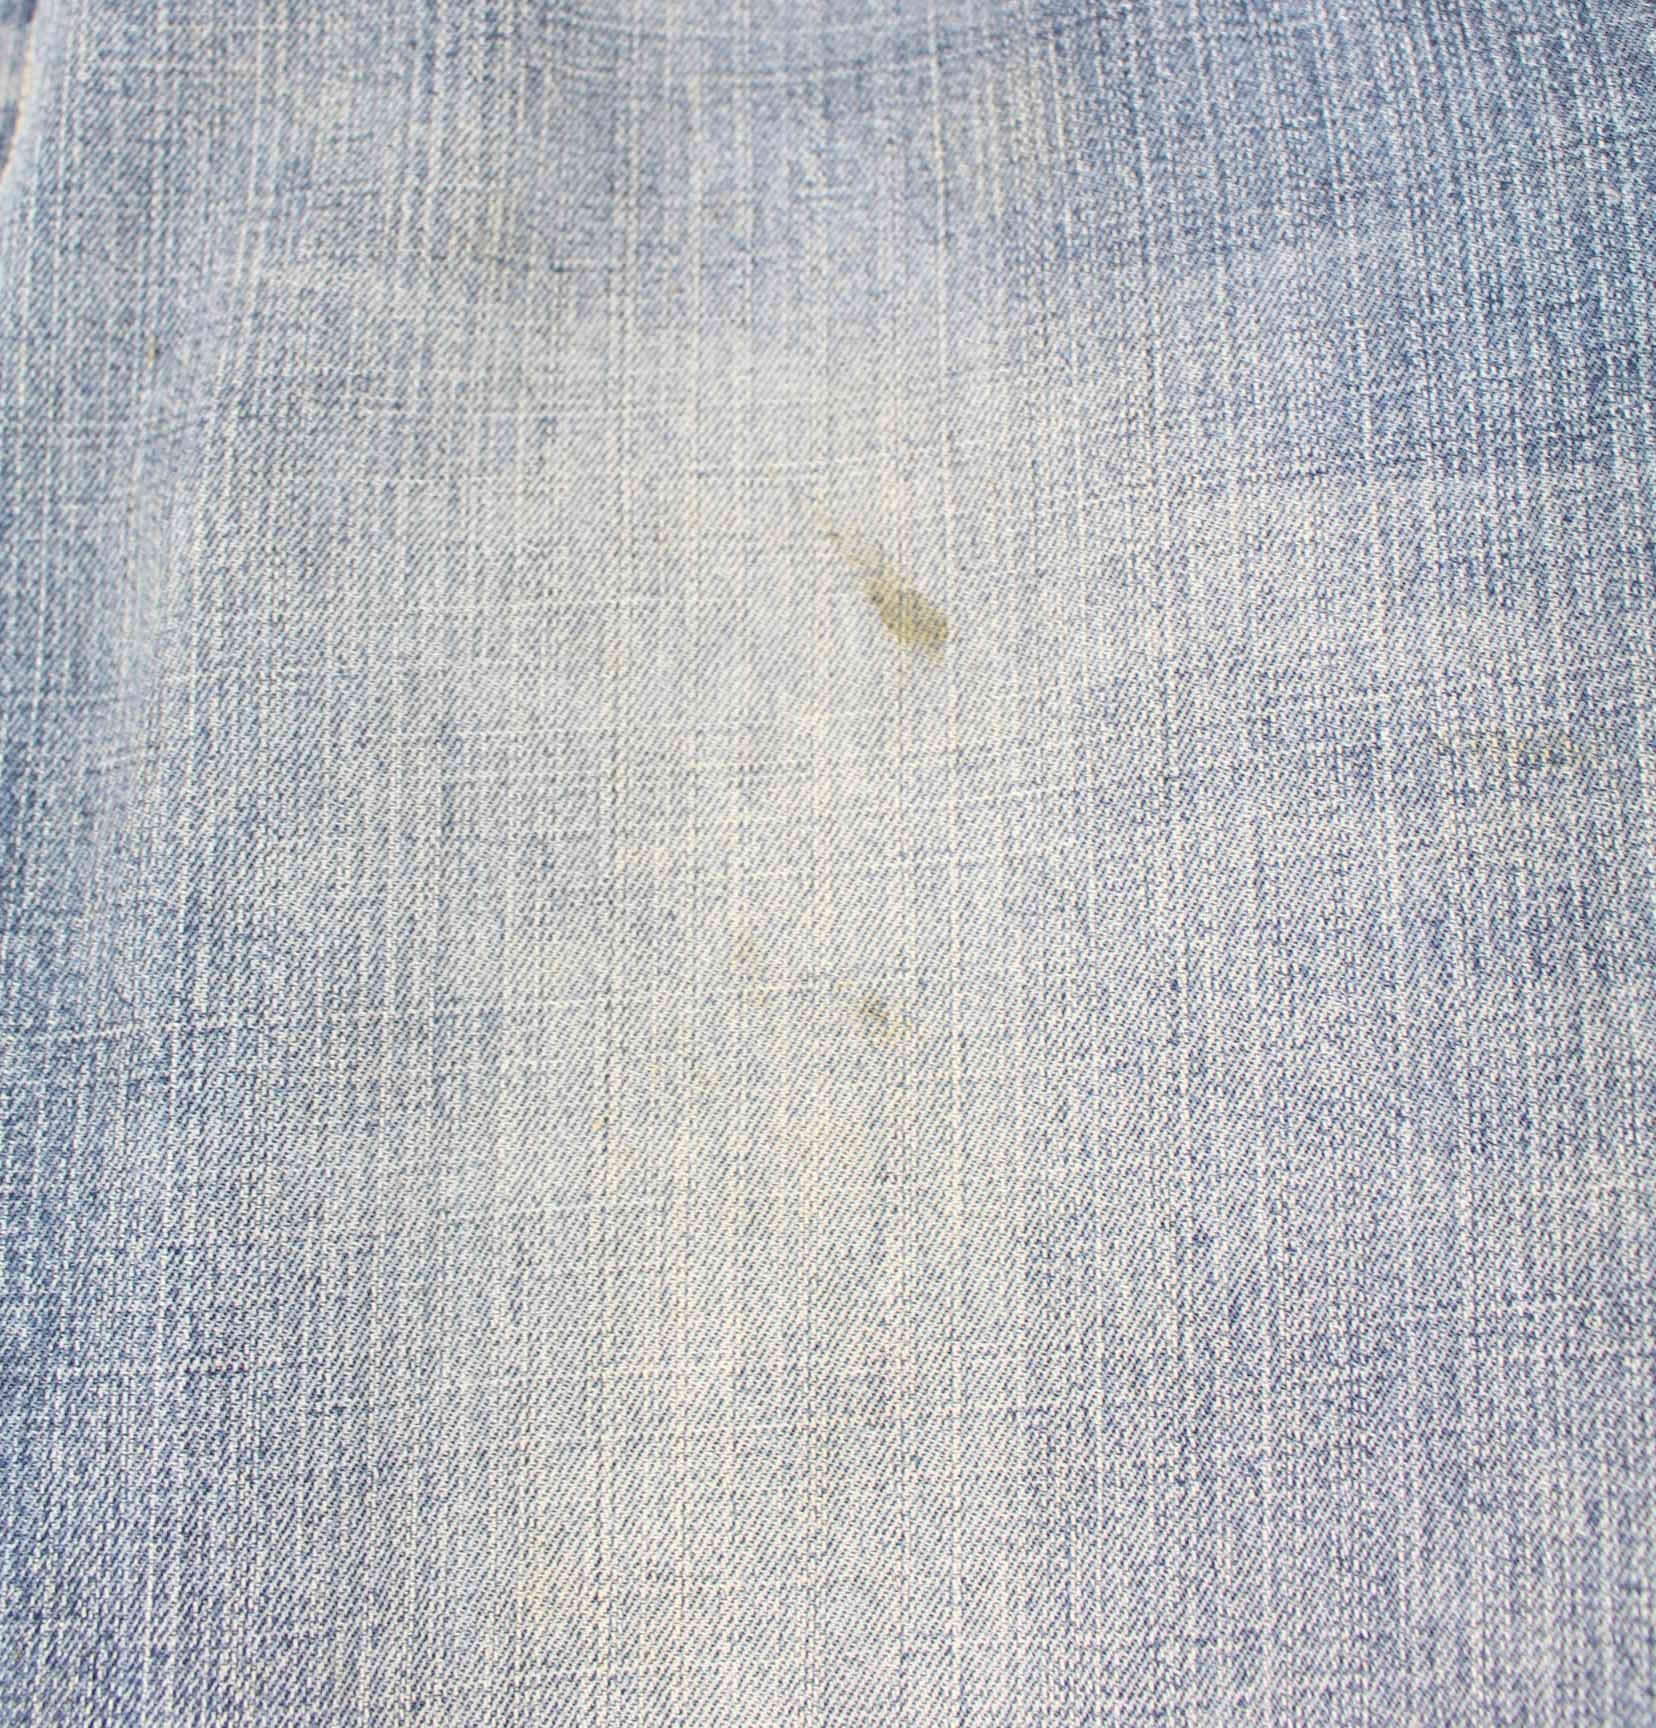 Ecko y2k Embroidered Baggy Fit Jeans Blau W36 L34 (detail image 1)